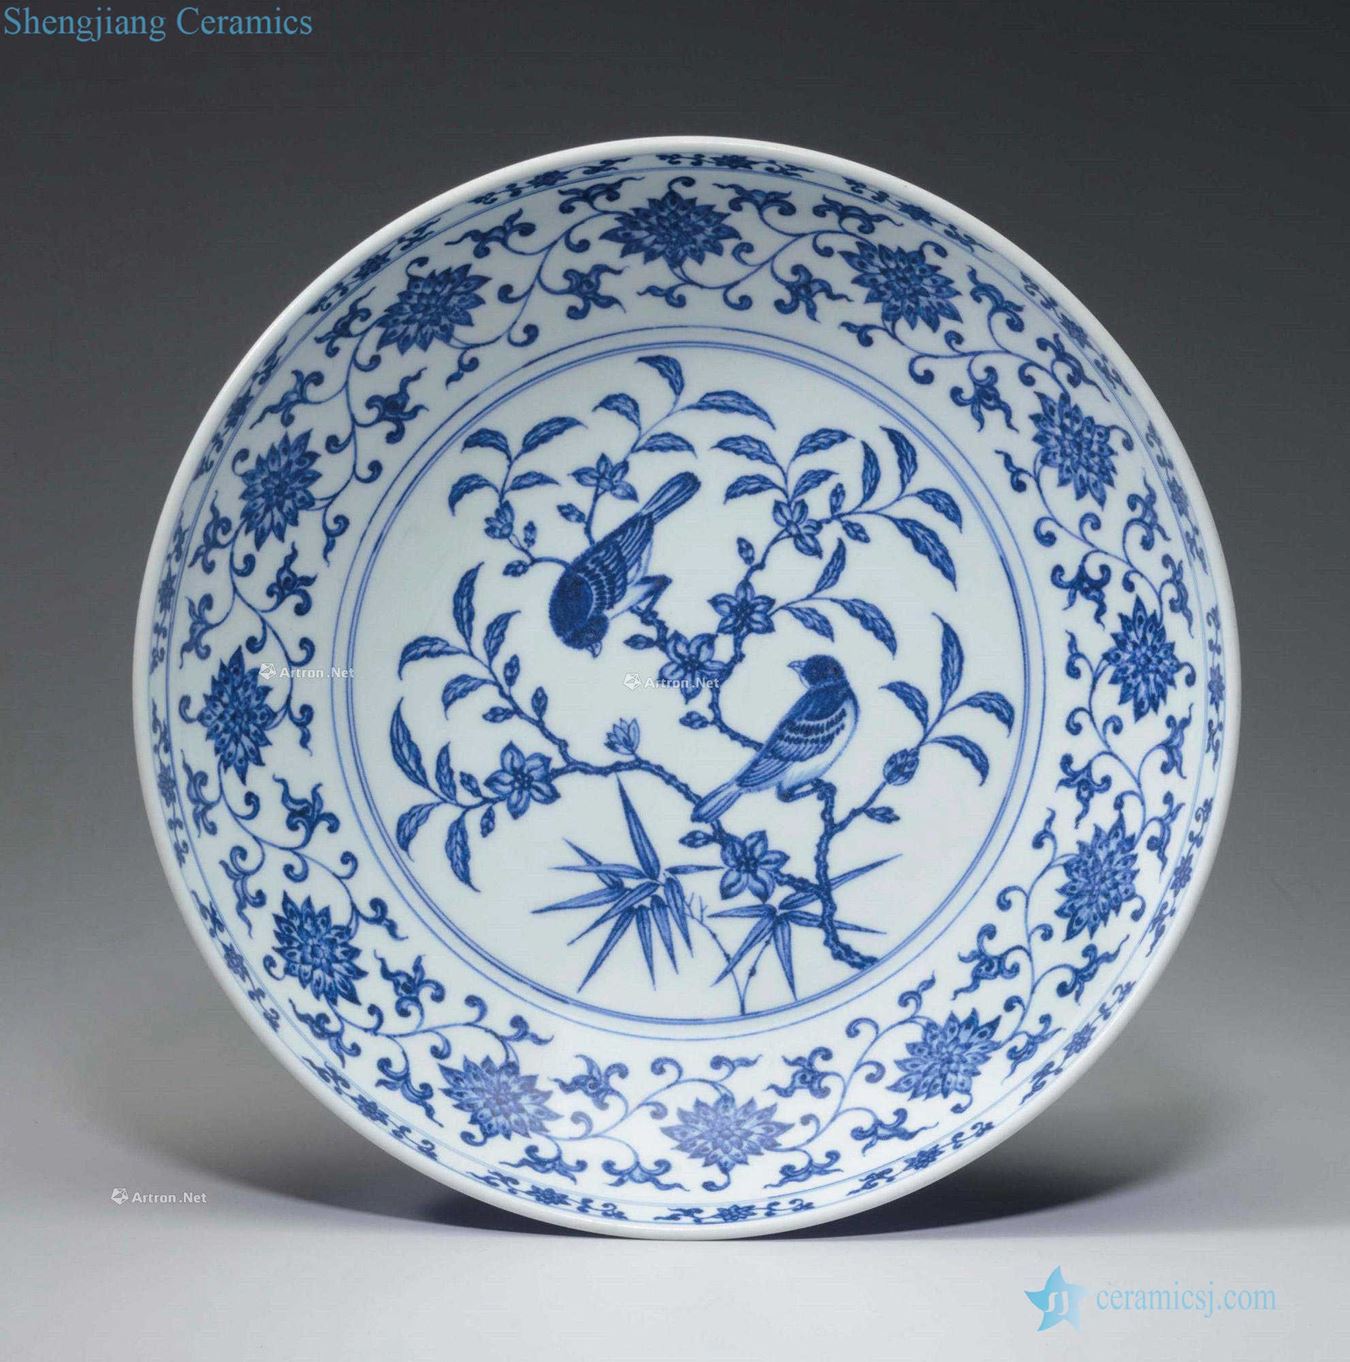 YONGZHENG PERIOD (1723 ~ 1735) A FINELY made MING - STYLE BLUE AND WHITE DISH